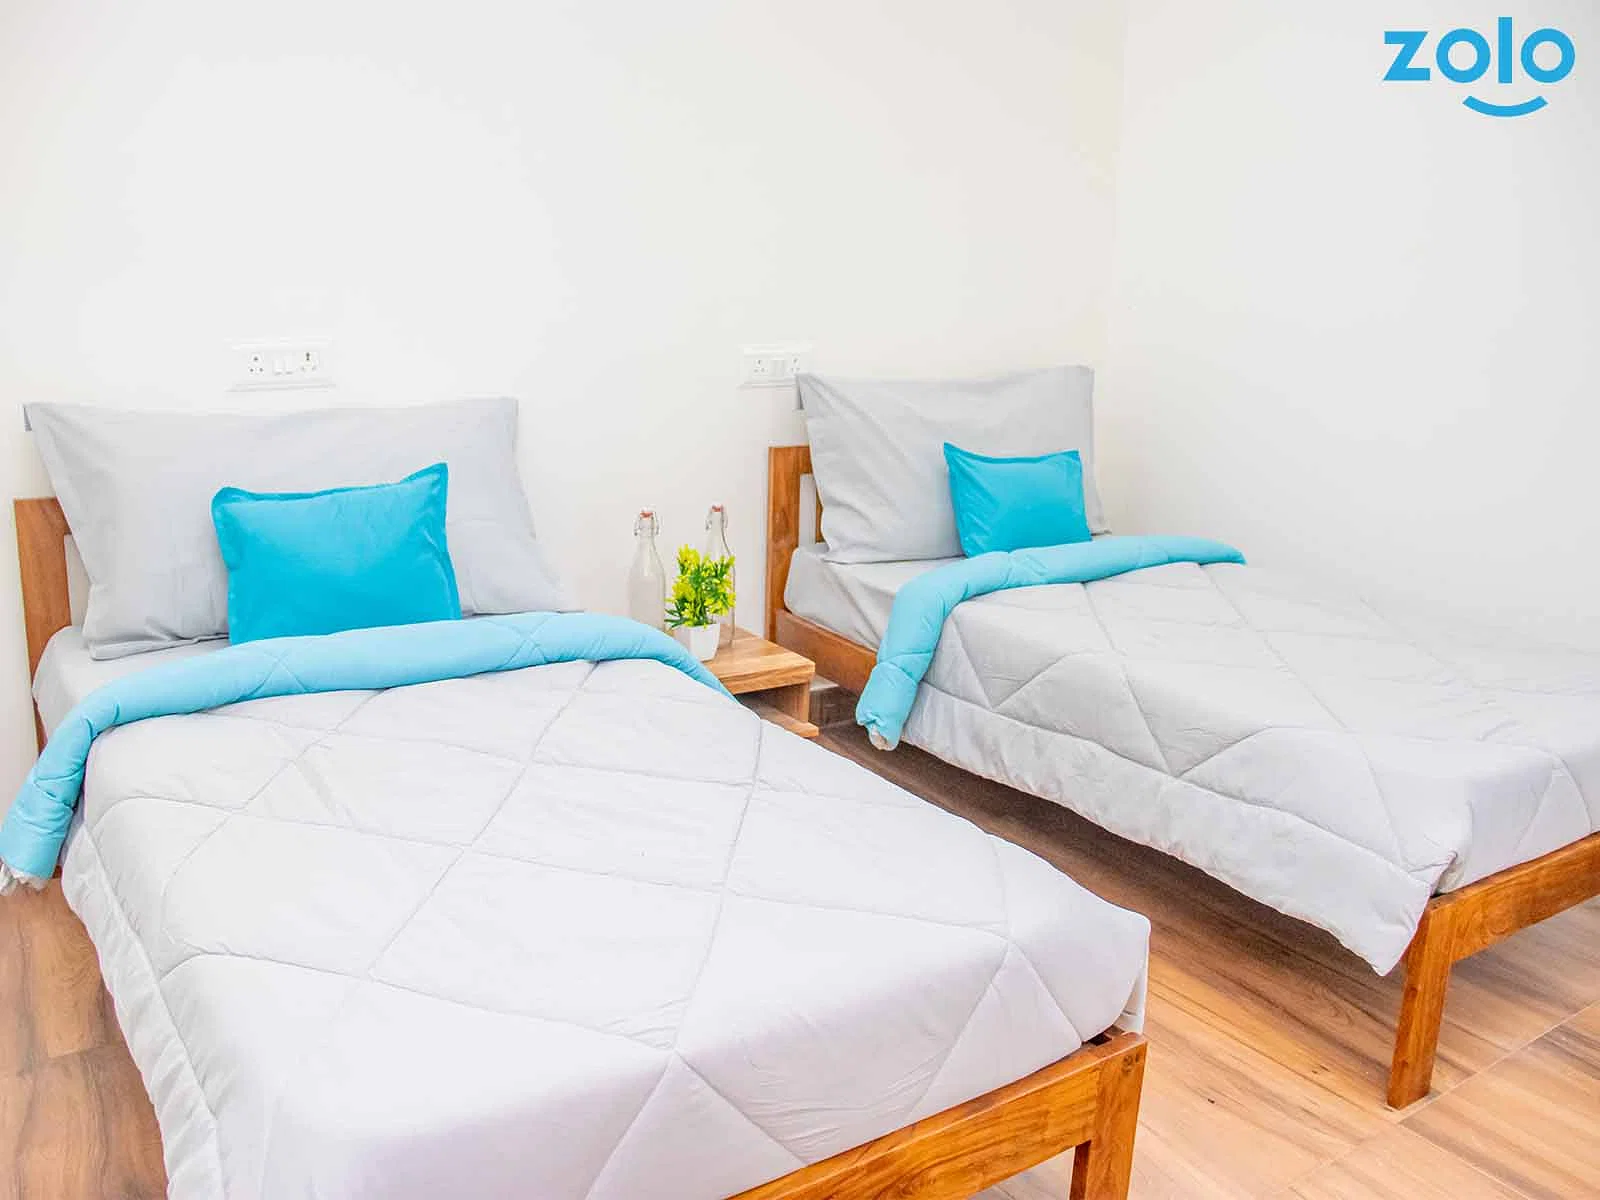 pgs in HSR Layout with Daily housekeeping facilities and free Wi-Fi-Zolo Akshala